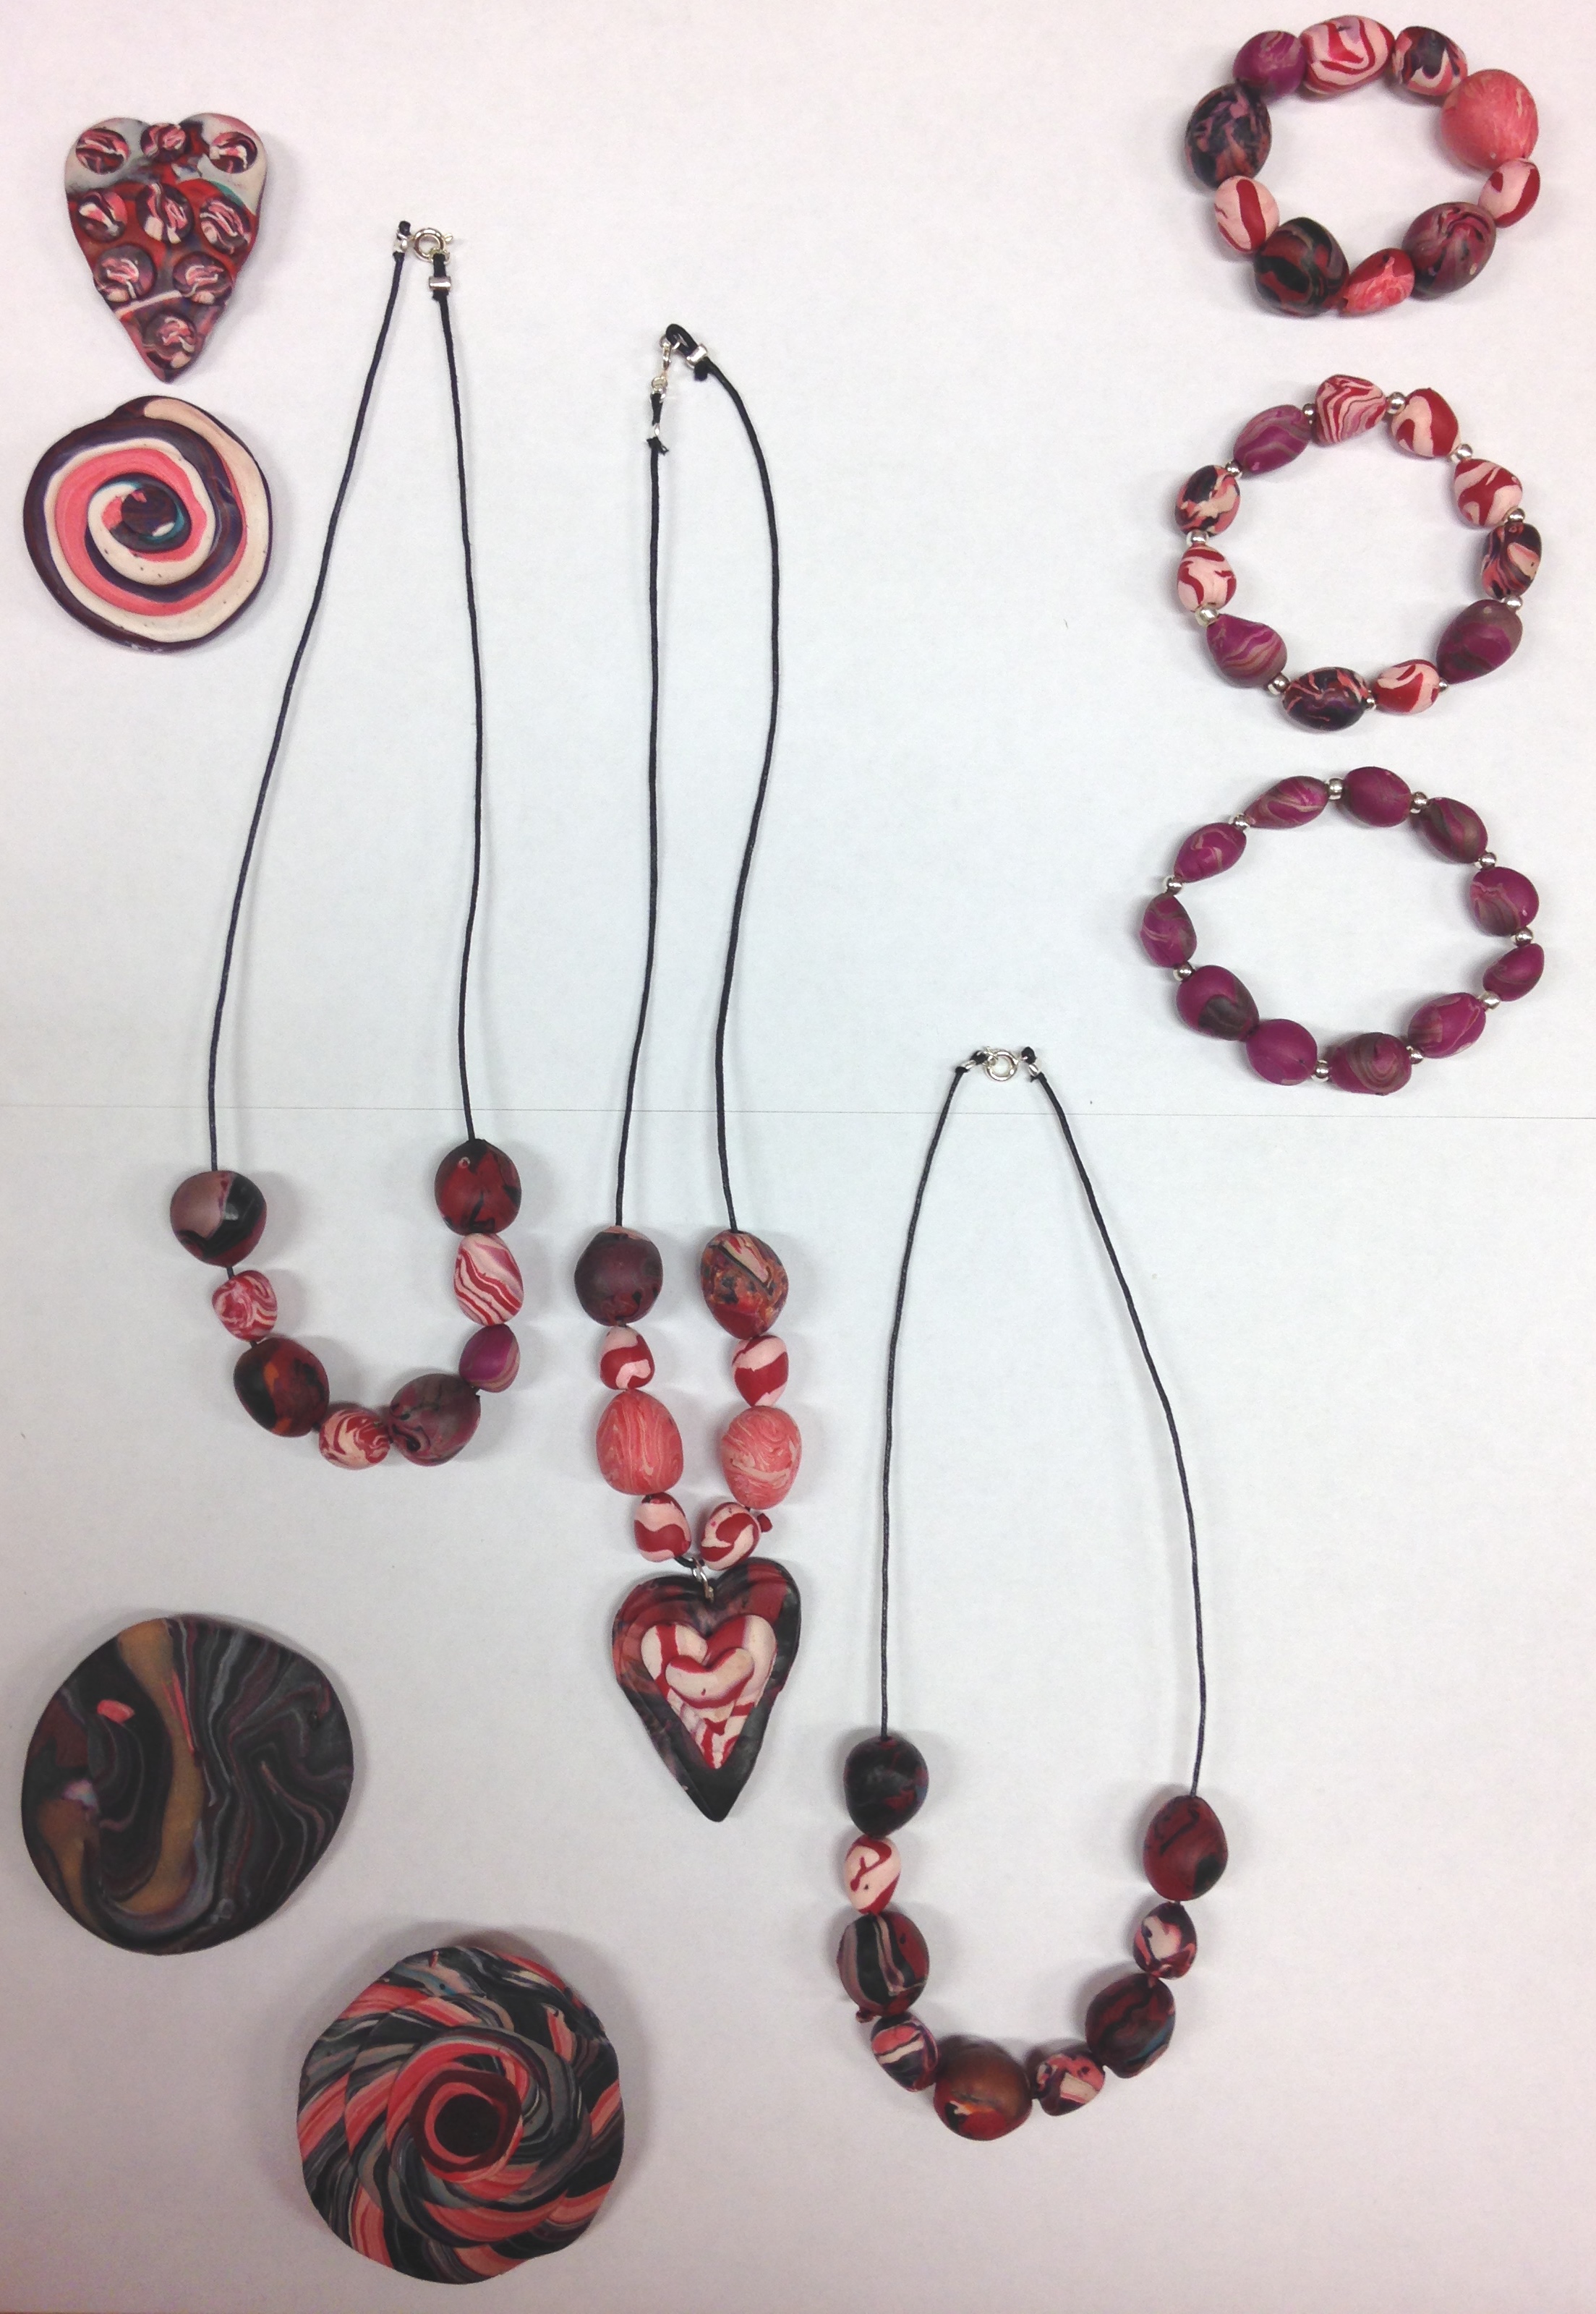 clay jewellery in the colours pink, red, black and white